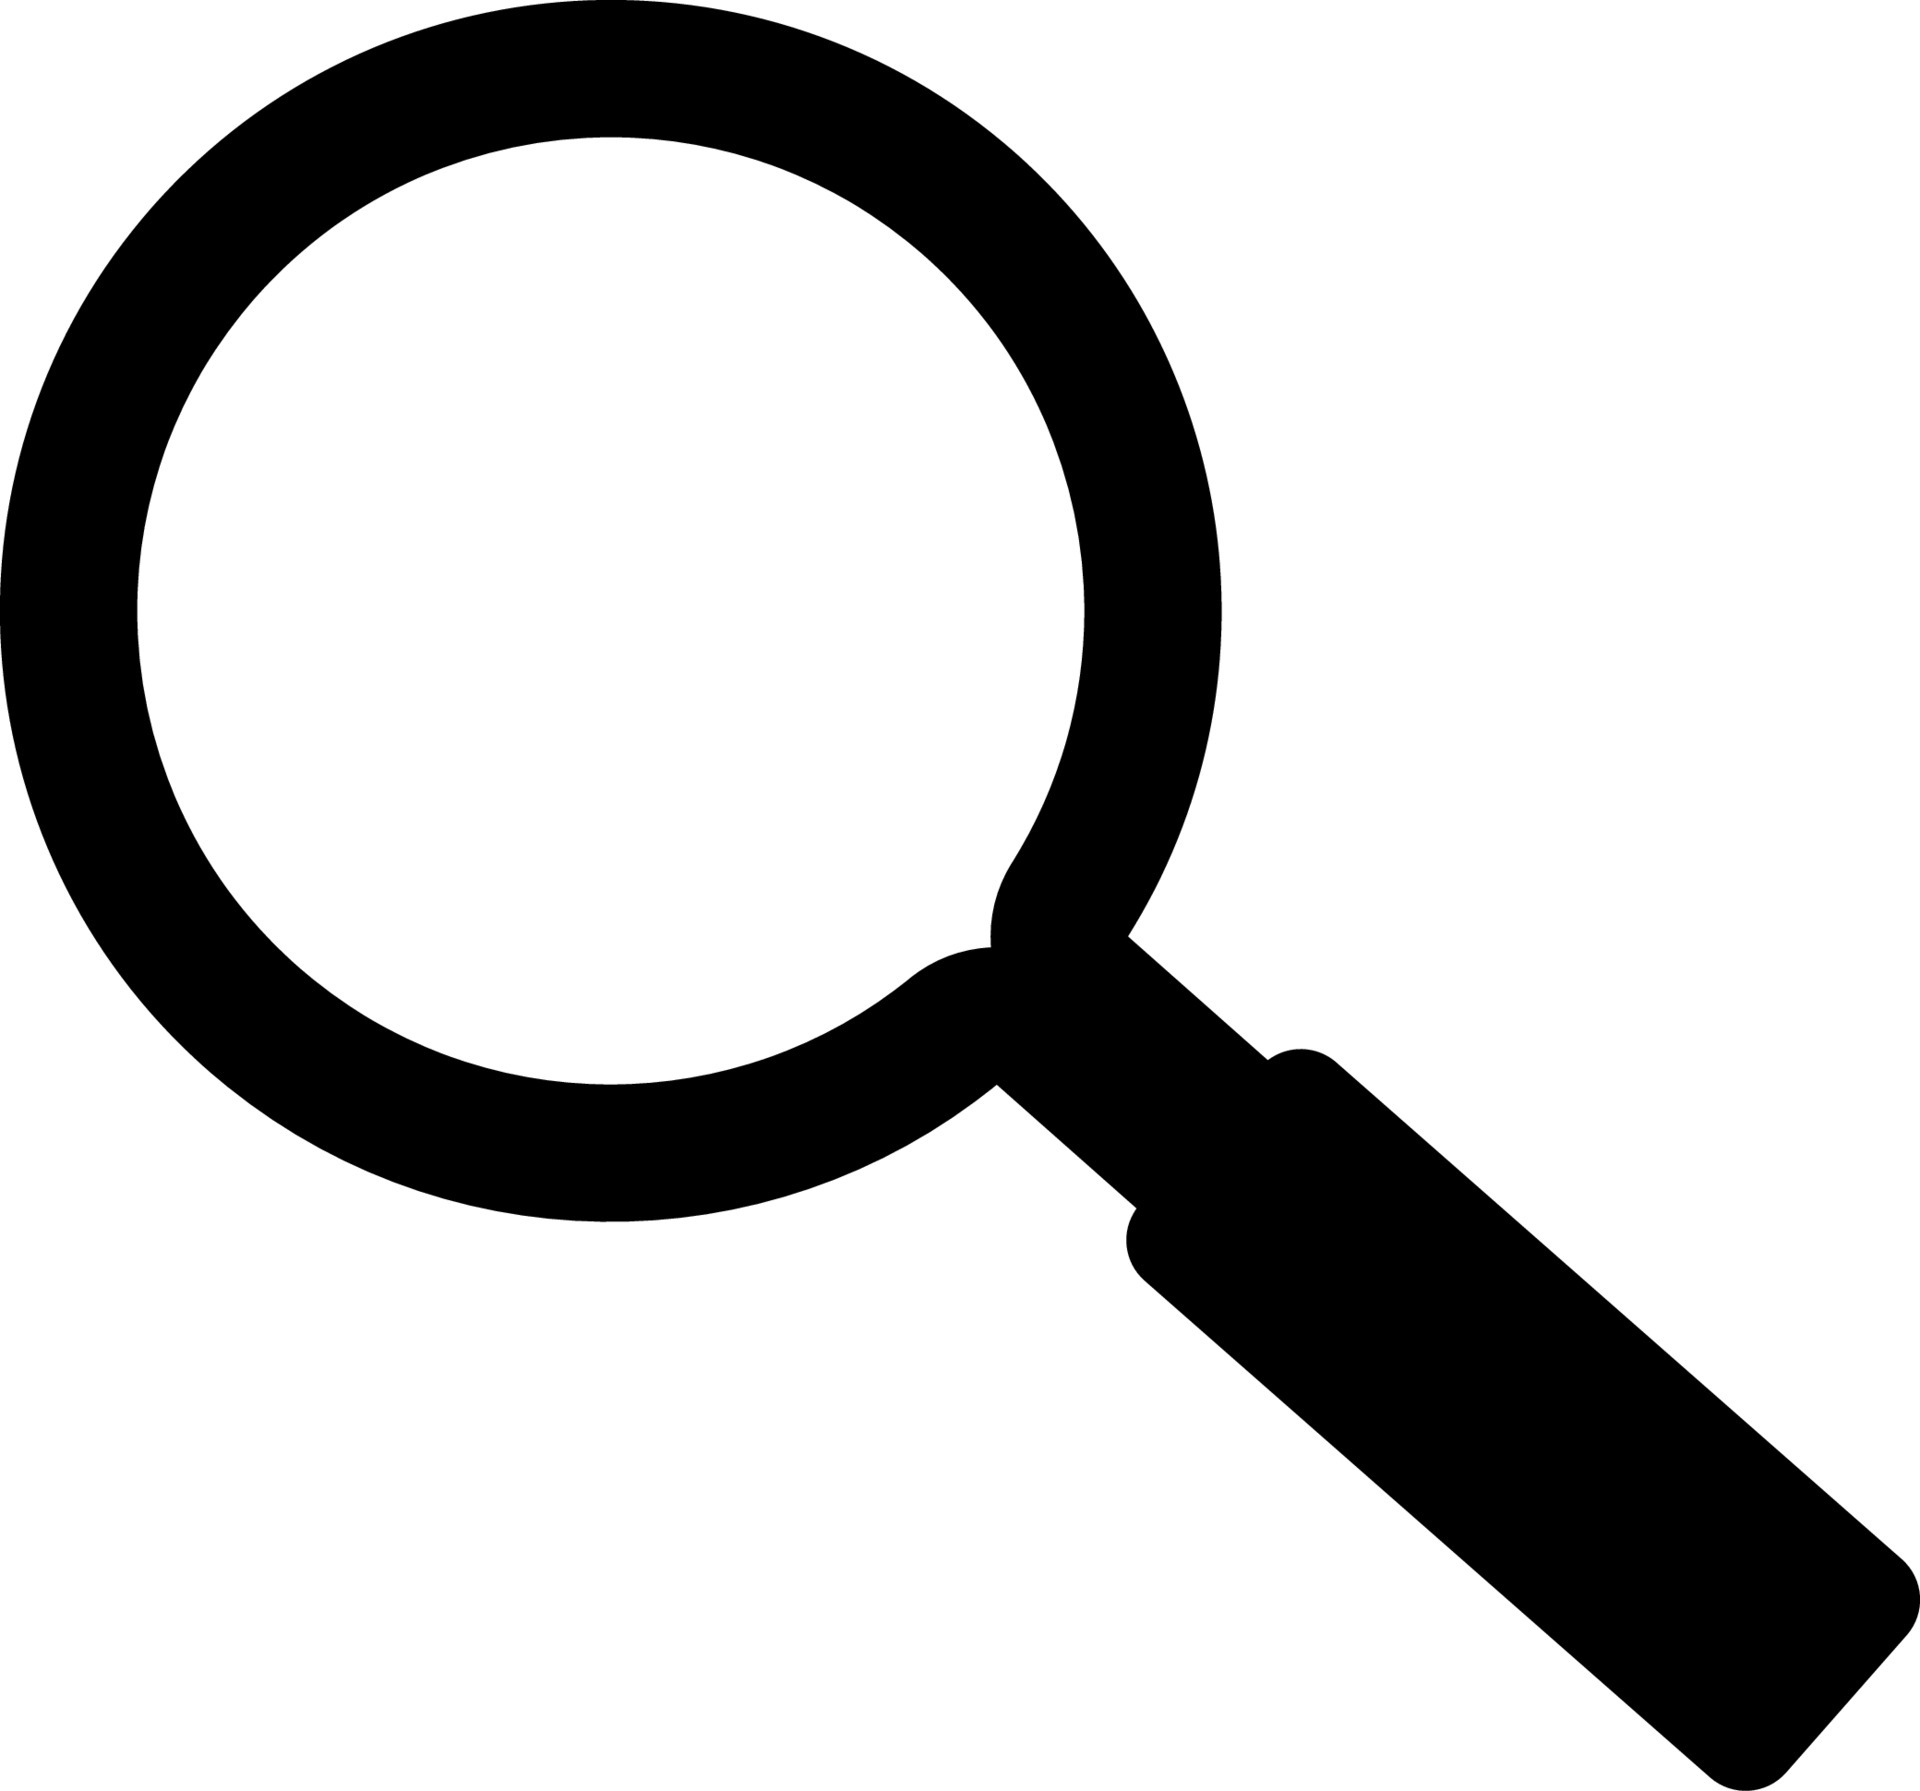 https://static.vecteezy.com/system/resources/previews/005/487/432/original/clipart-icon-lupe-loop-search-free-vector.jpg